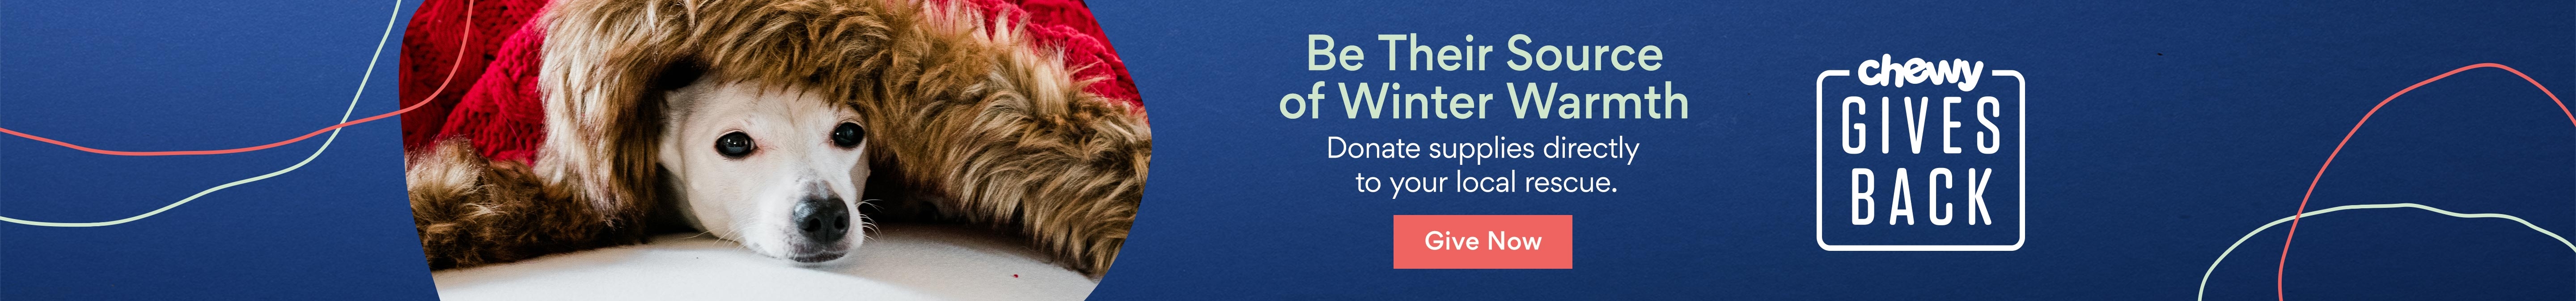 Be Their Source of Winter Warmth. Donate supplies directly to your local rescue. Shop Now.